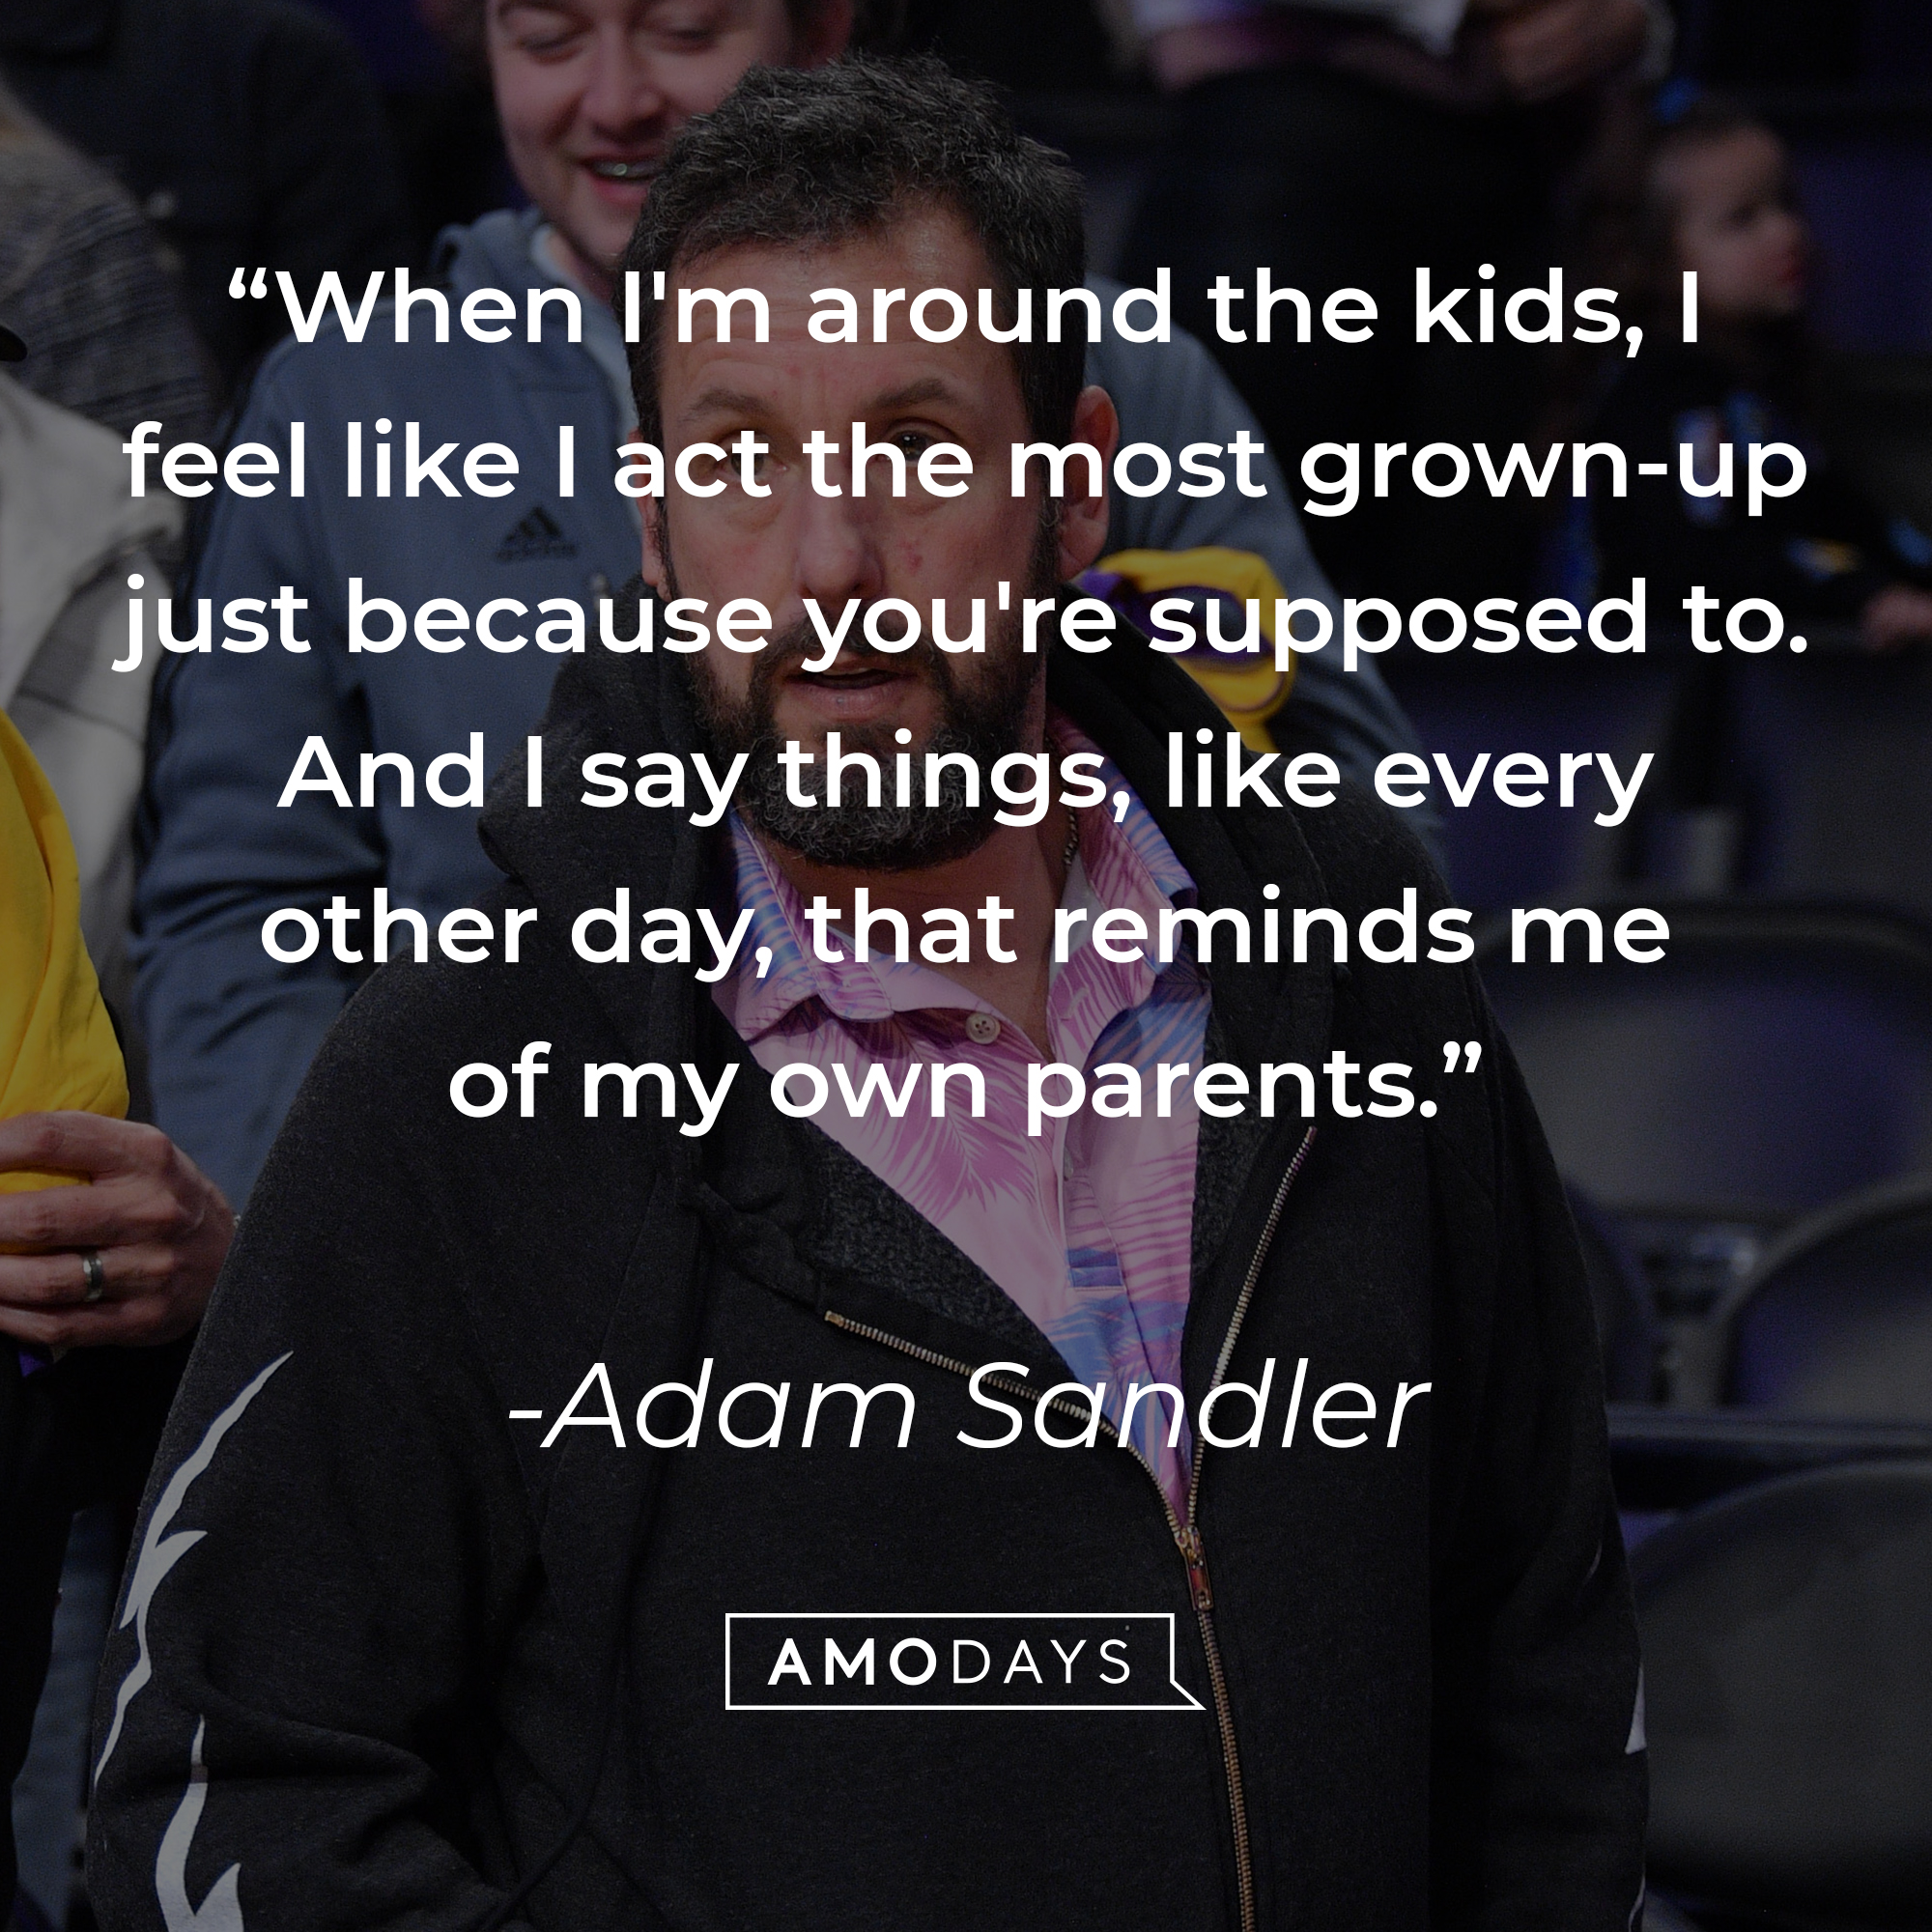 Adam Sandler's quote: "When I'm around the kids, I feel like I act the most grown-up just because you're supposed to. And I say things, like every other day, that reminds me of my own parents." | Source: Getty Images